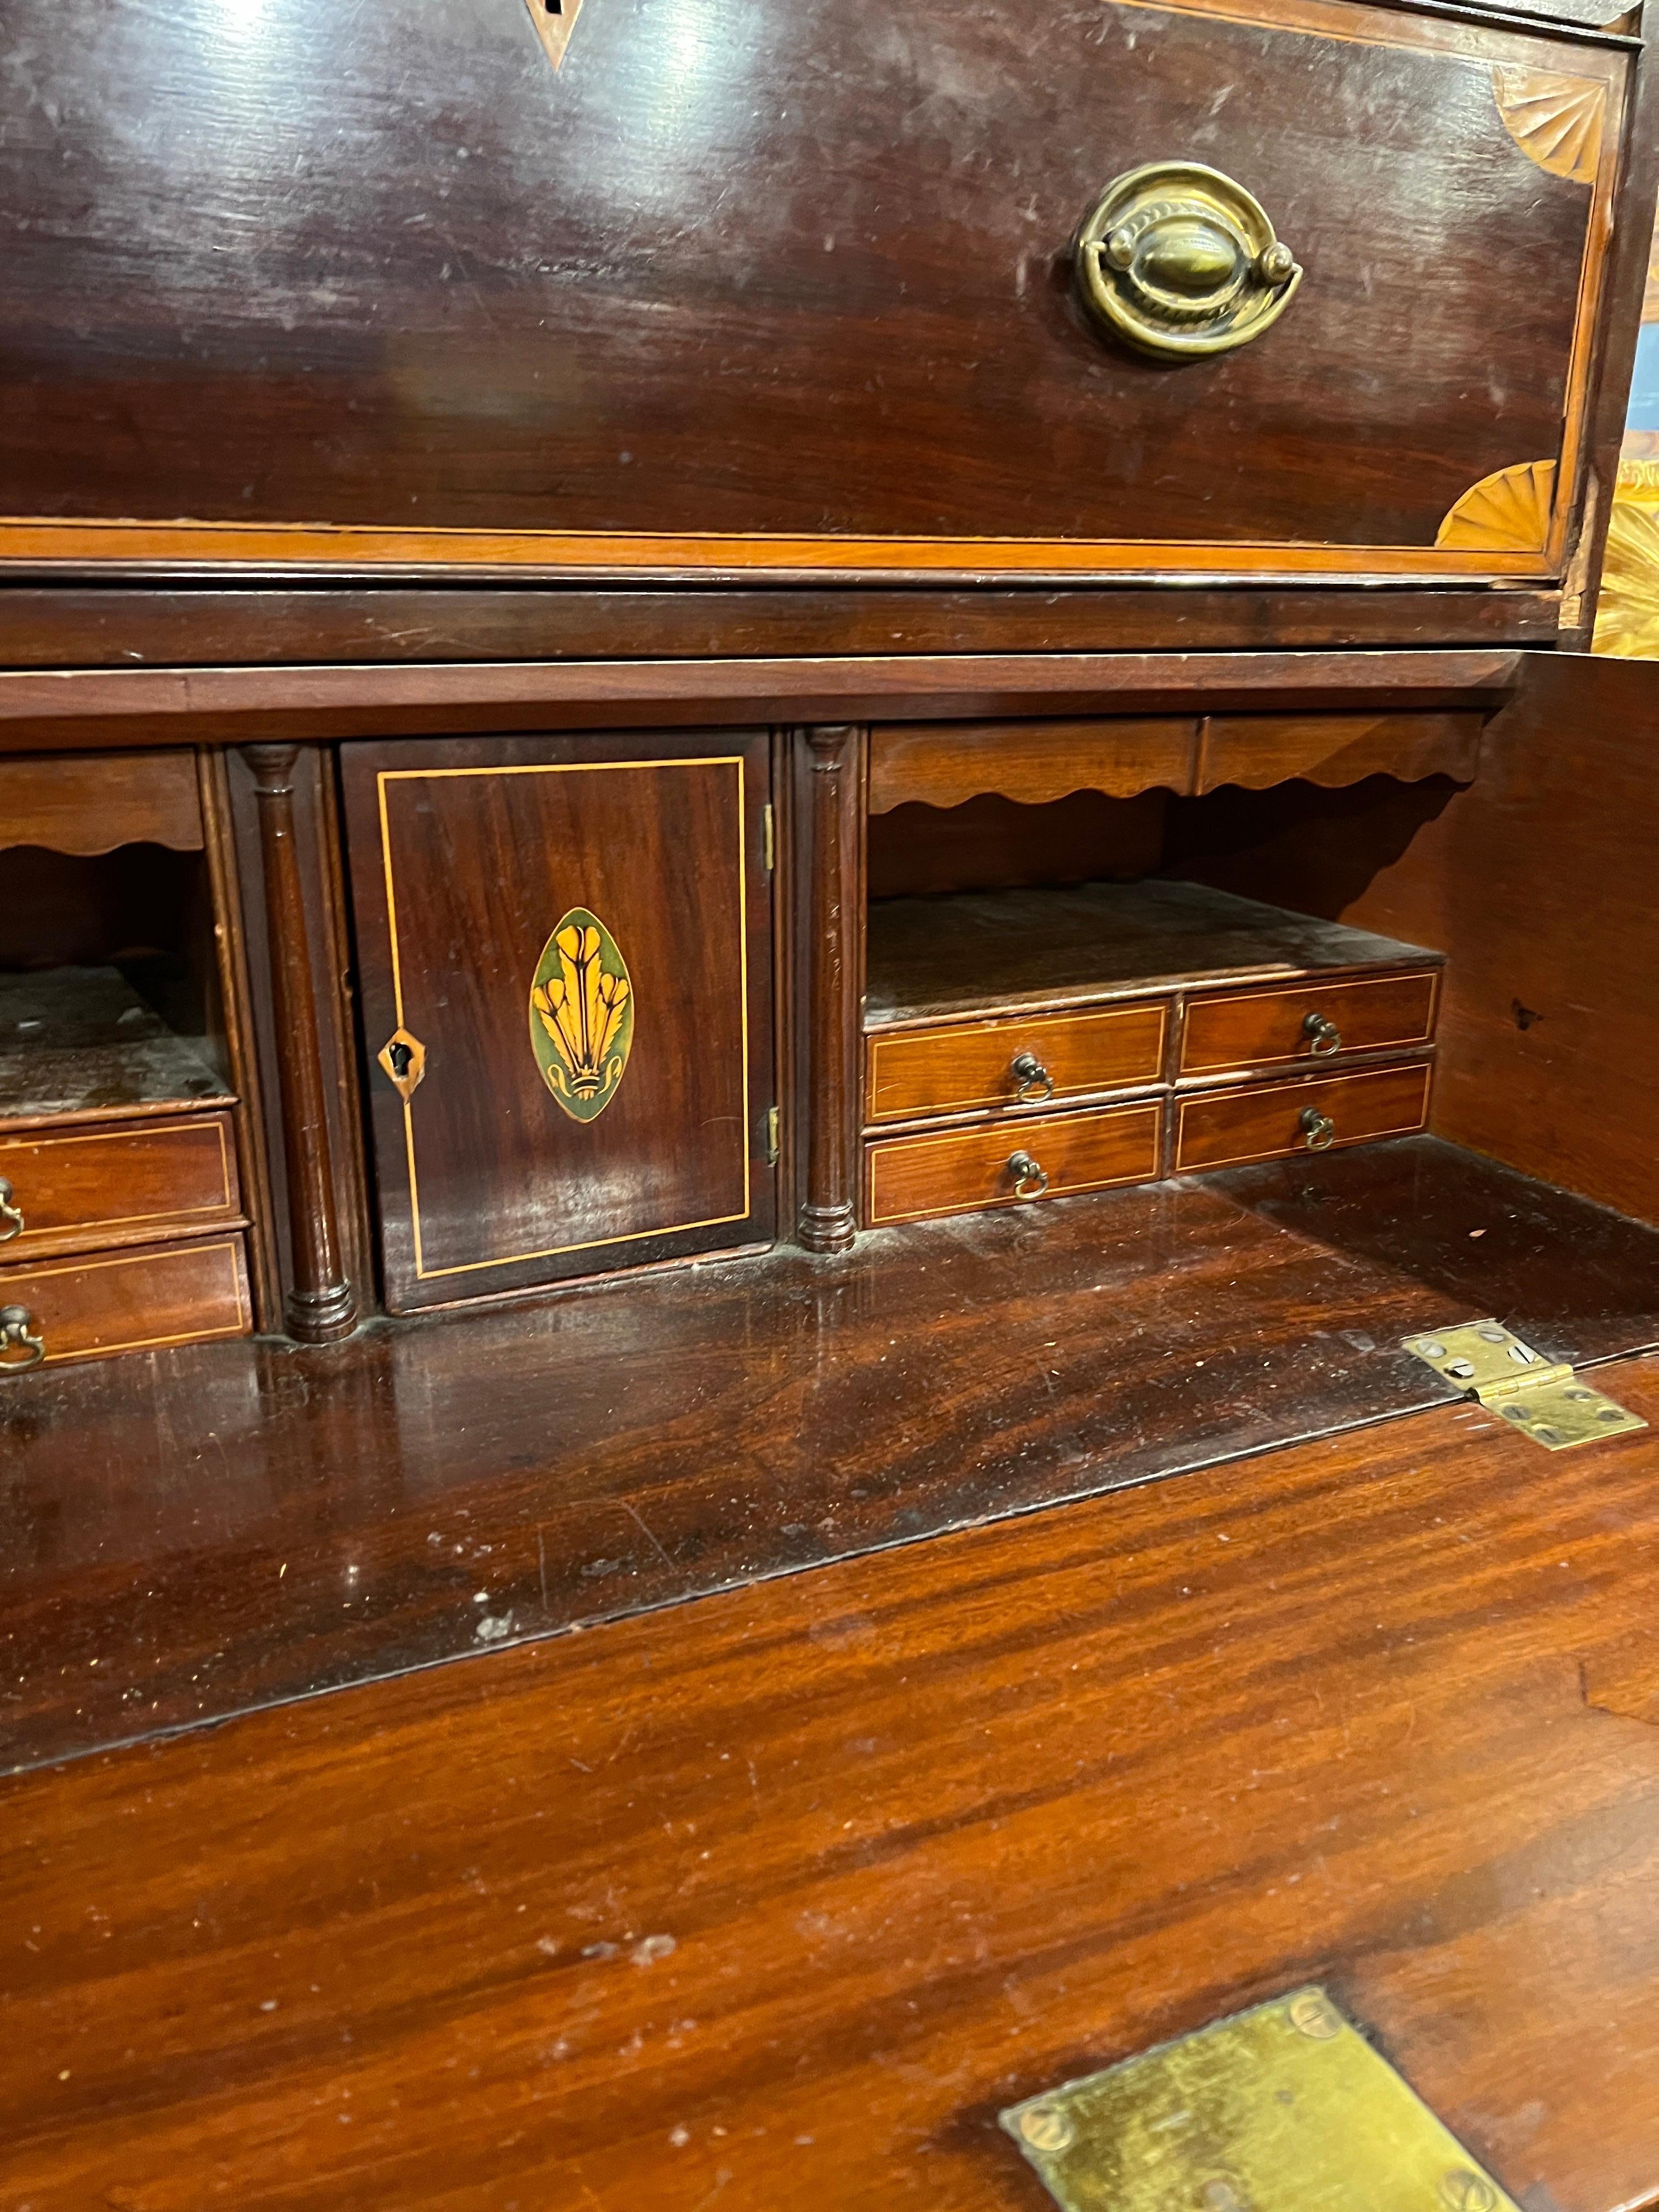 18th Century English George III Mahogany Inlaid Secretaire Chest of Drawers 1700 For Sale 4